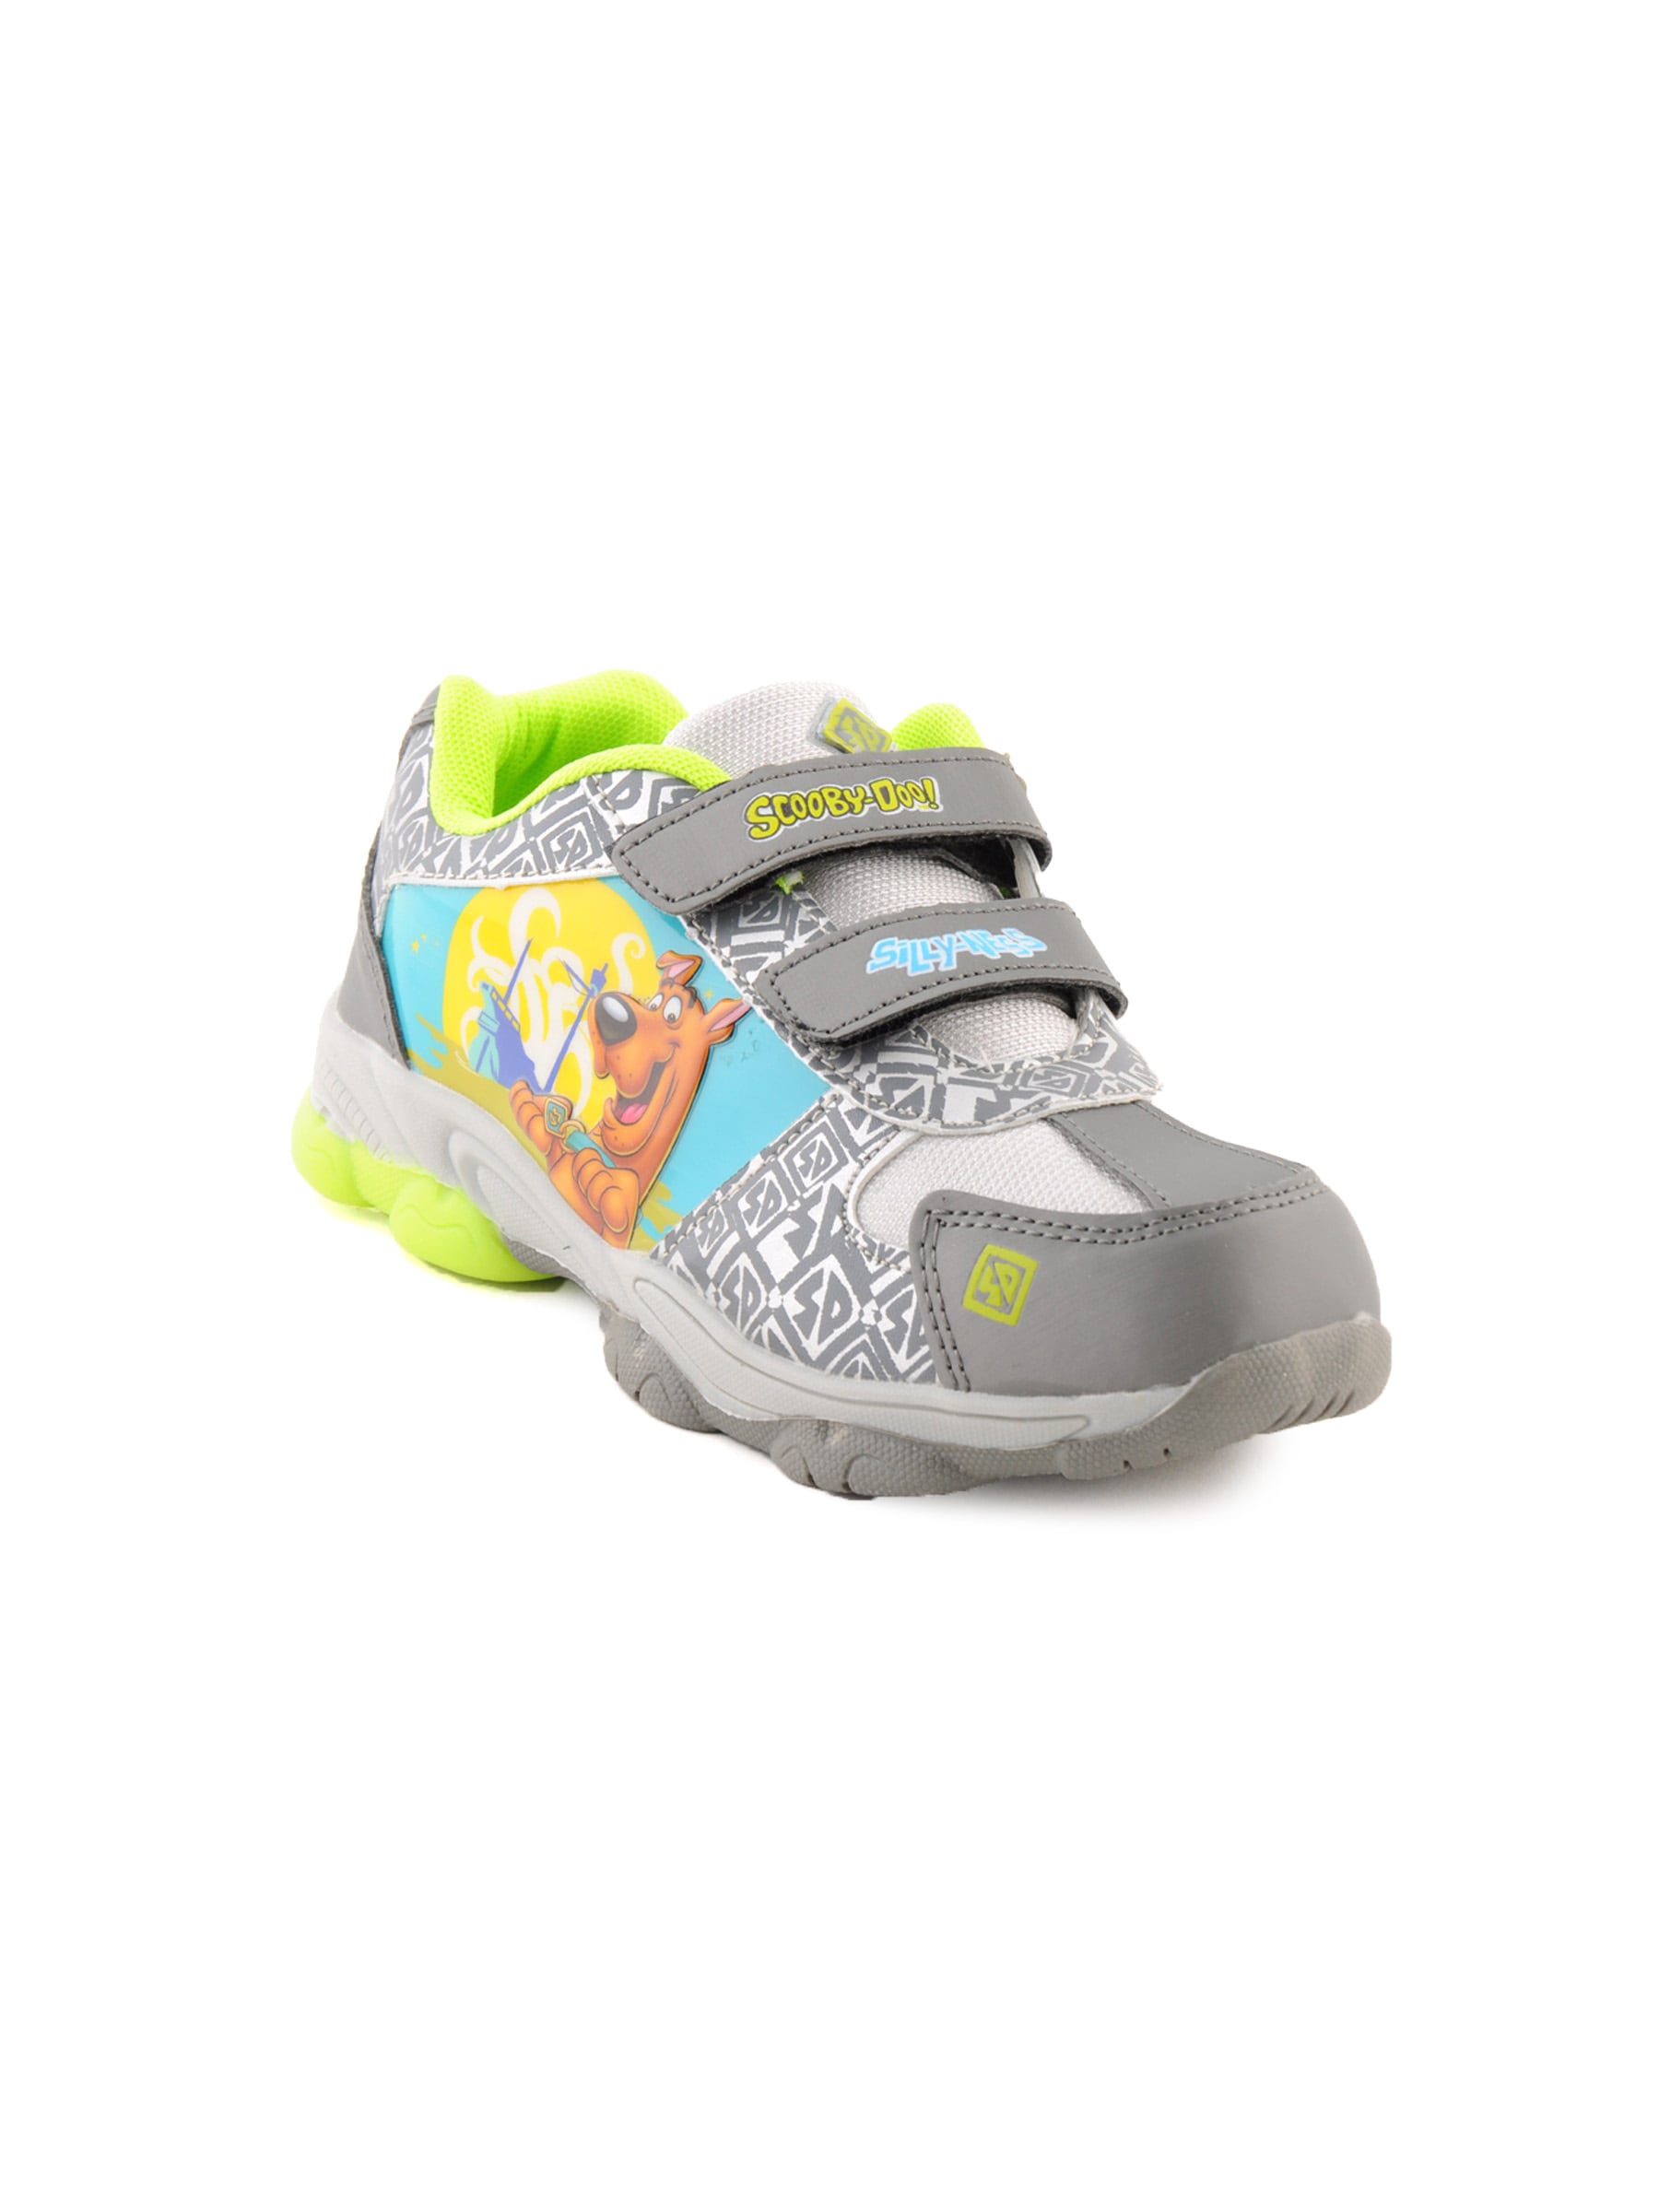 Warner Bros Kids Unisex SD Silly Shoe Silver Casual Shoes